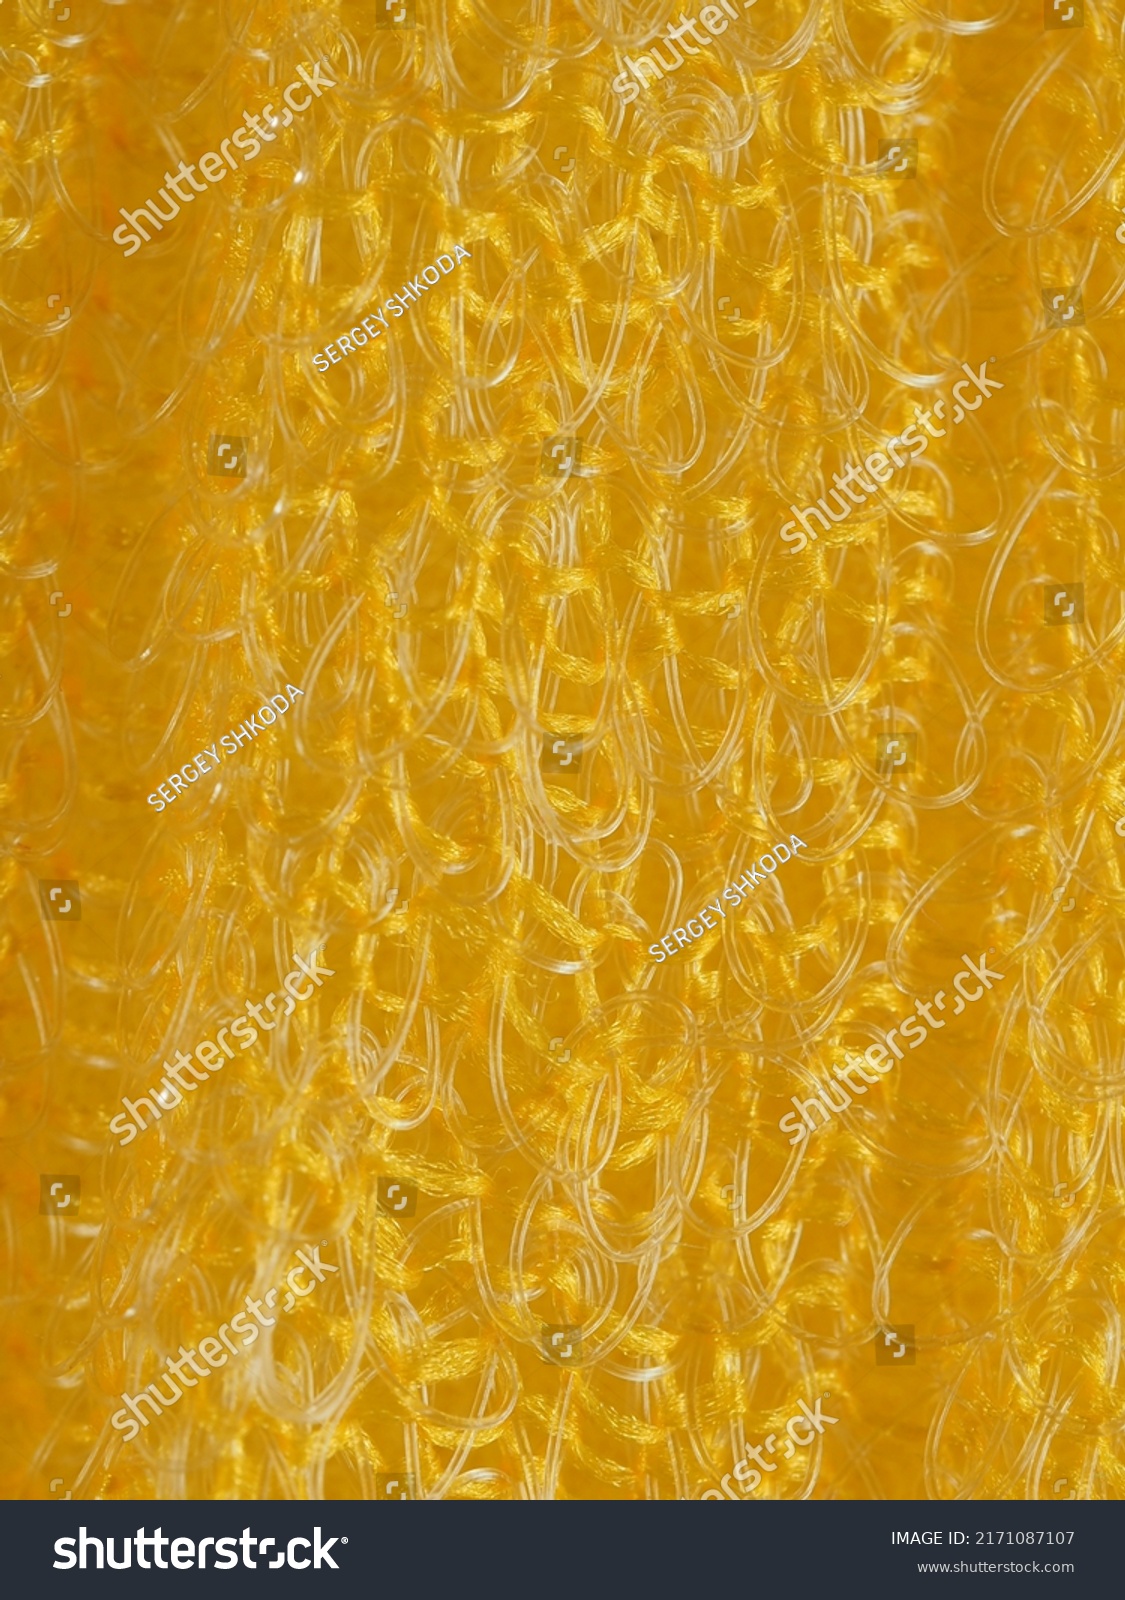 close up, background, texture, large vertical banner. heterogeneous surface structure bright saturated yellow sponge for washing dishes, kitchen, bath. full depth of field. high resolution photo #2171087107